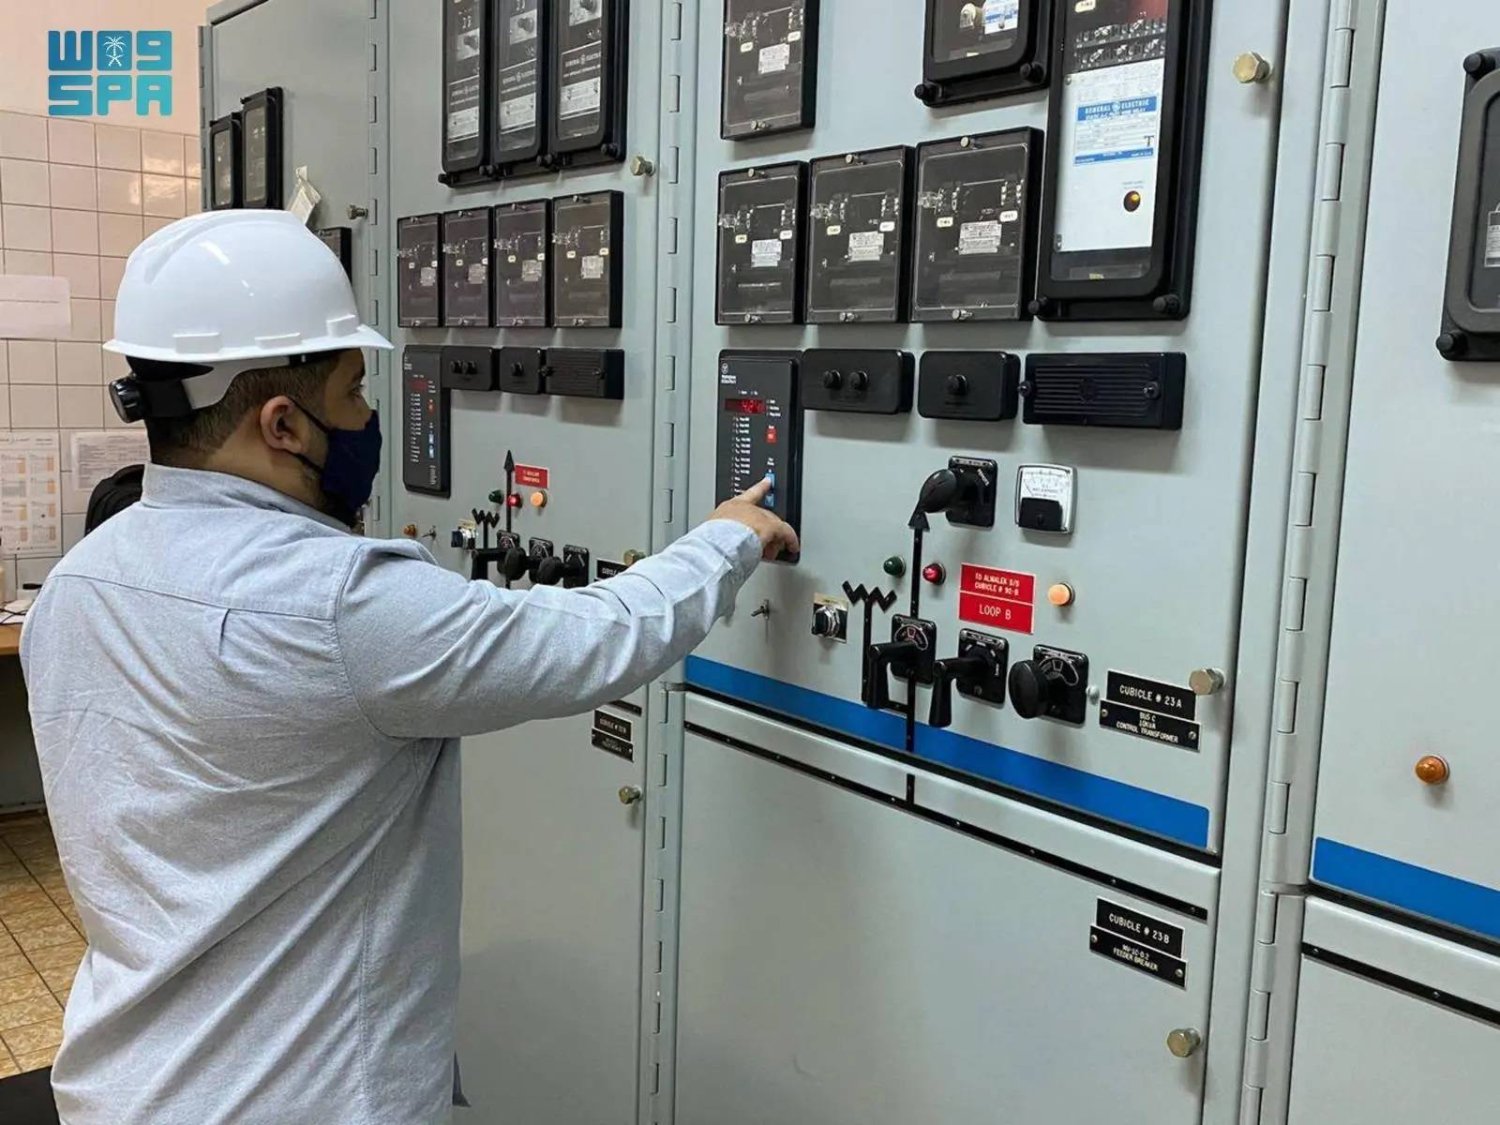 The General Authority for the Care of the Grand Mosque and the Prophet's Mosque in Saudi Arabia employs sophisticated technology to regulate temperatures within the Grand Mosque in Makkah throughout the year. (SPA)